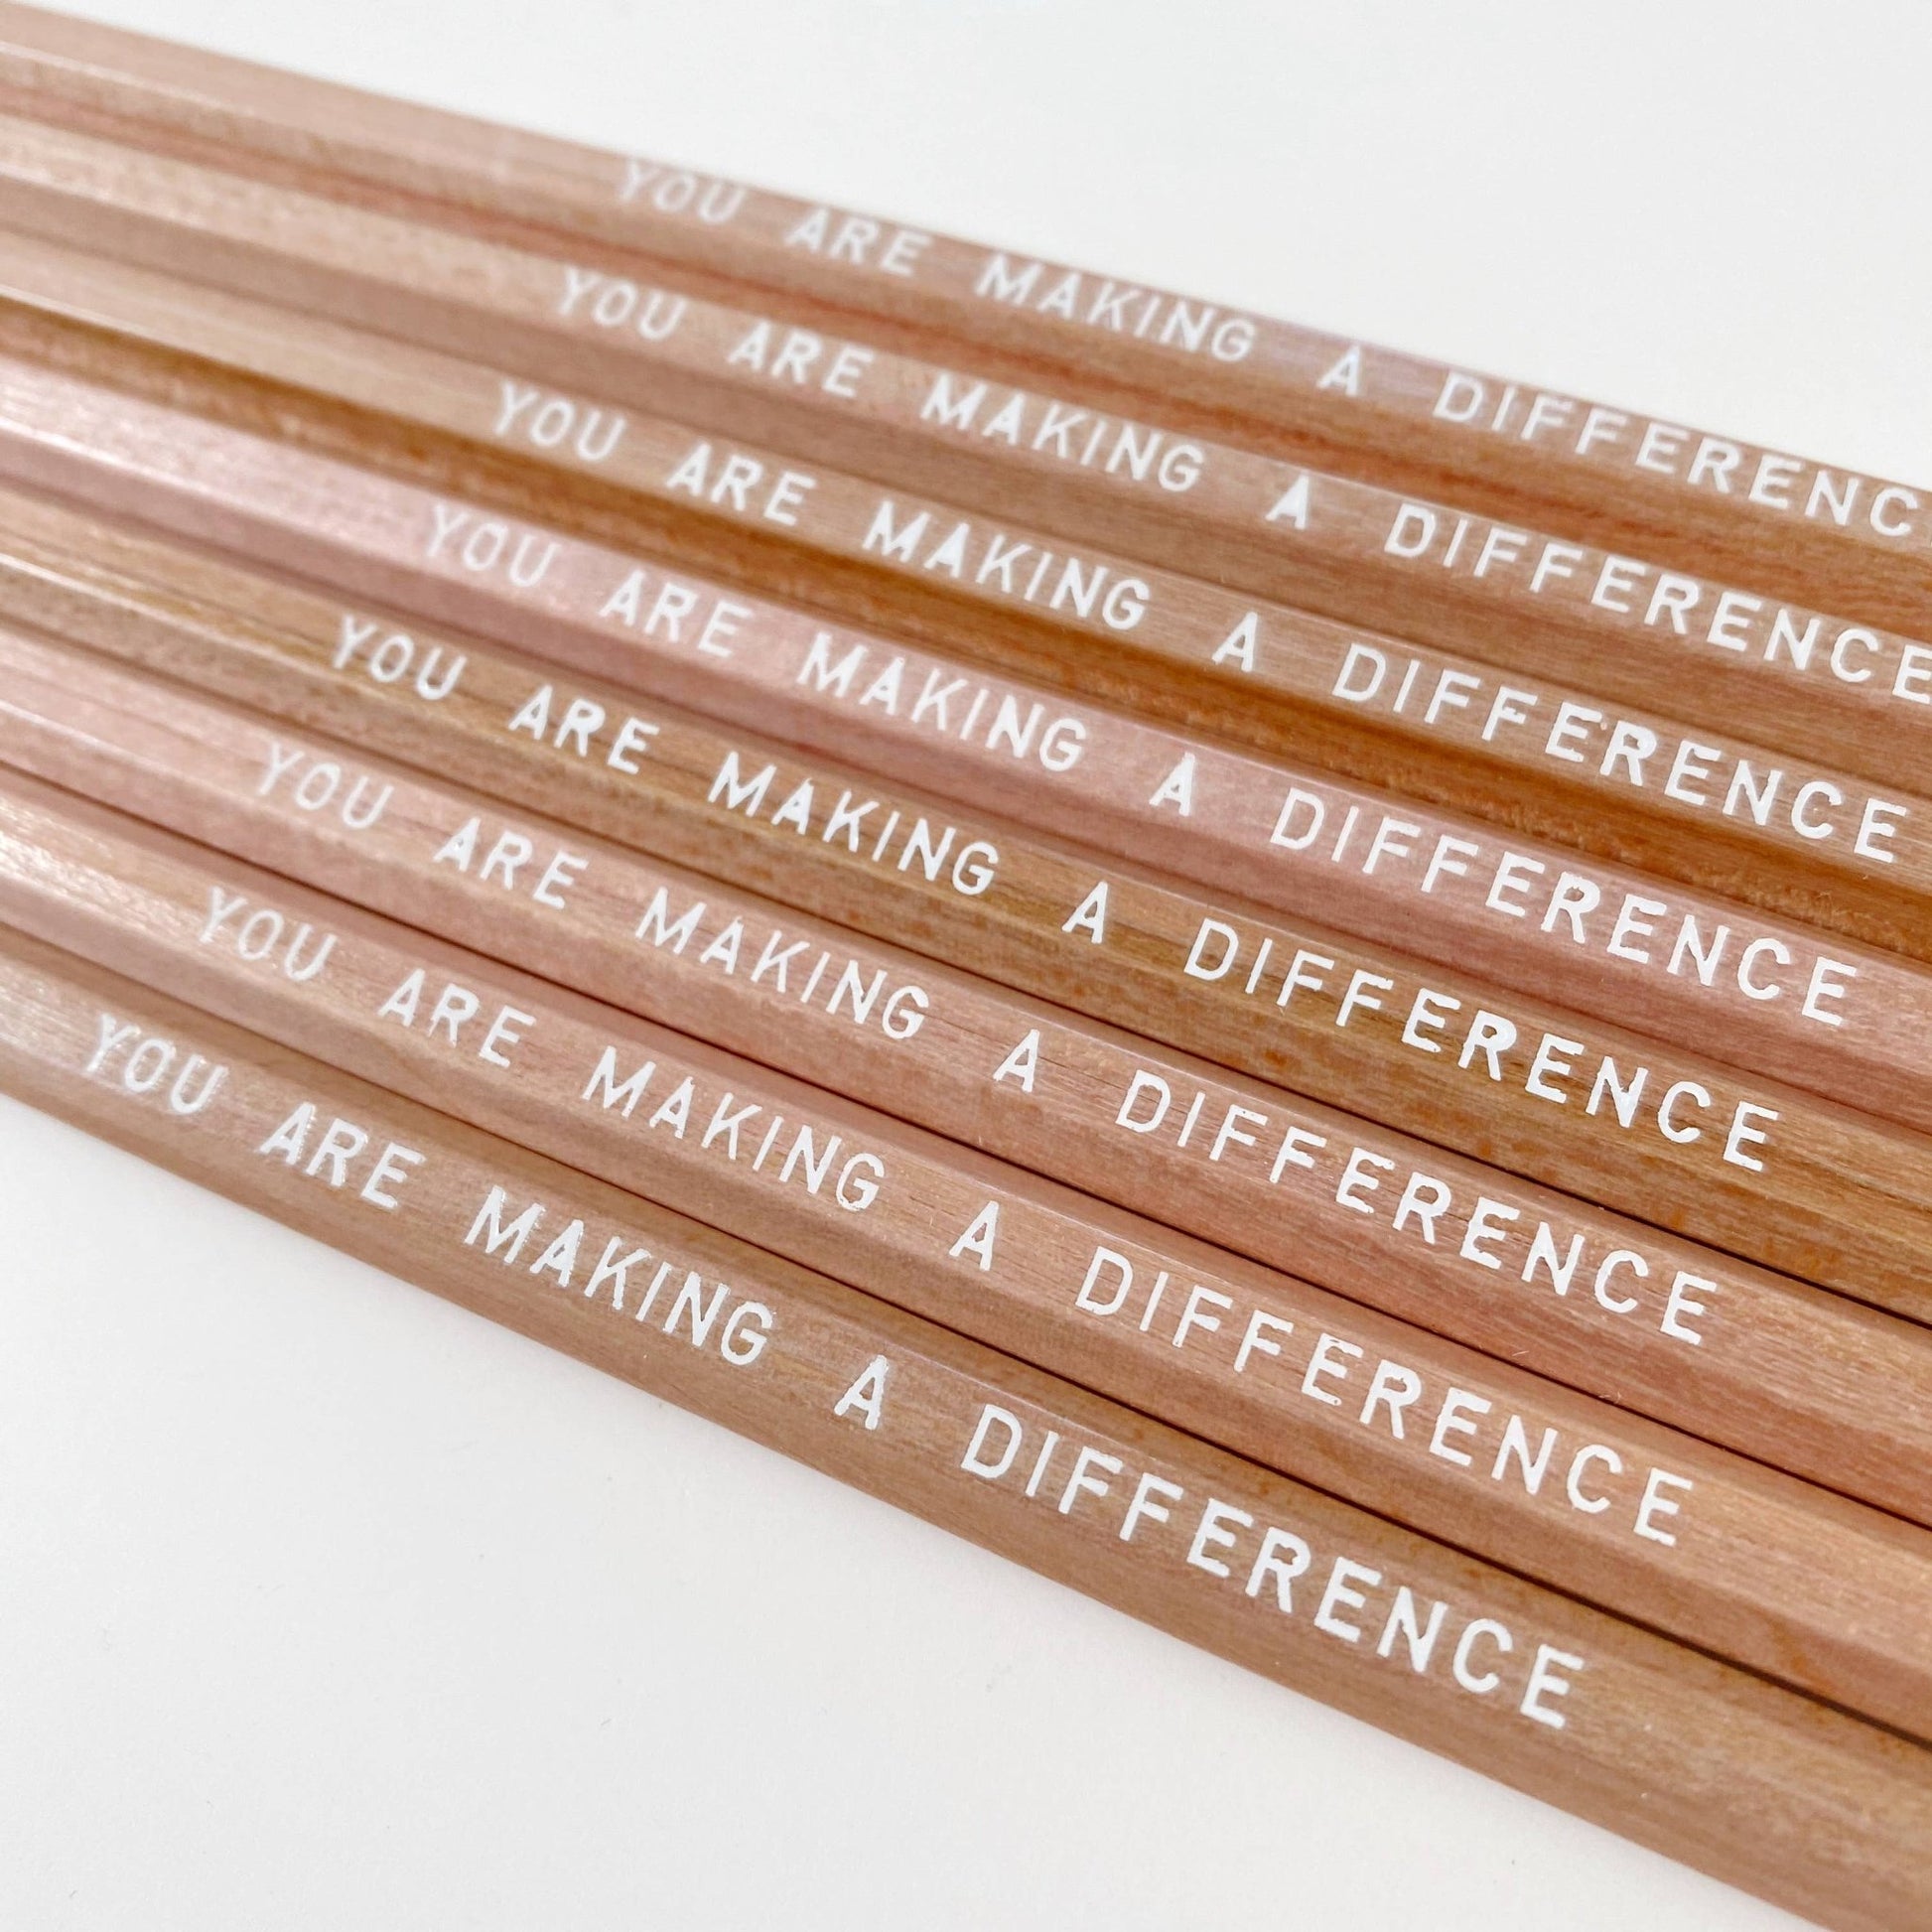 You Are Making a Difference Pencils - [ash-ling] Booksellers